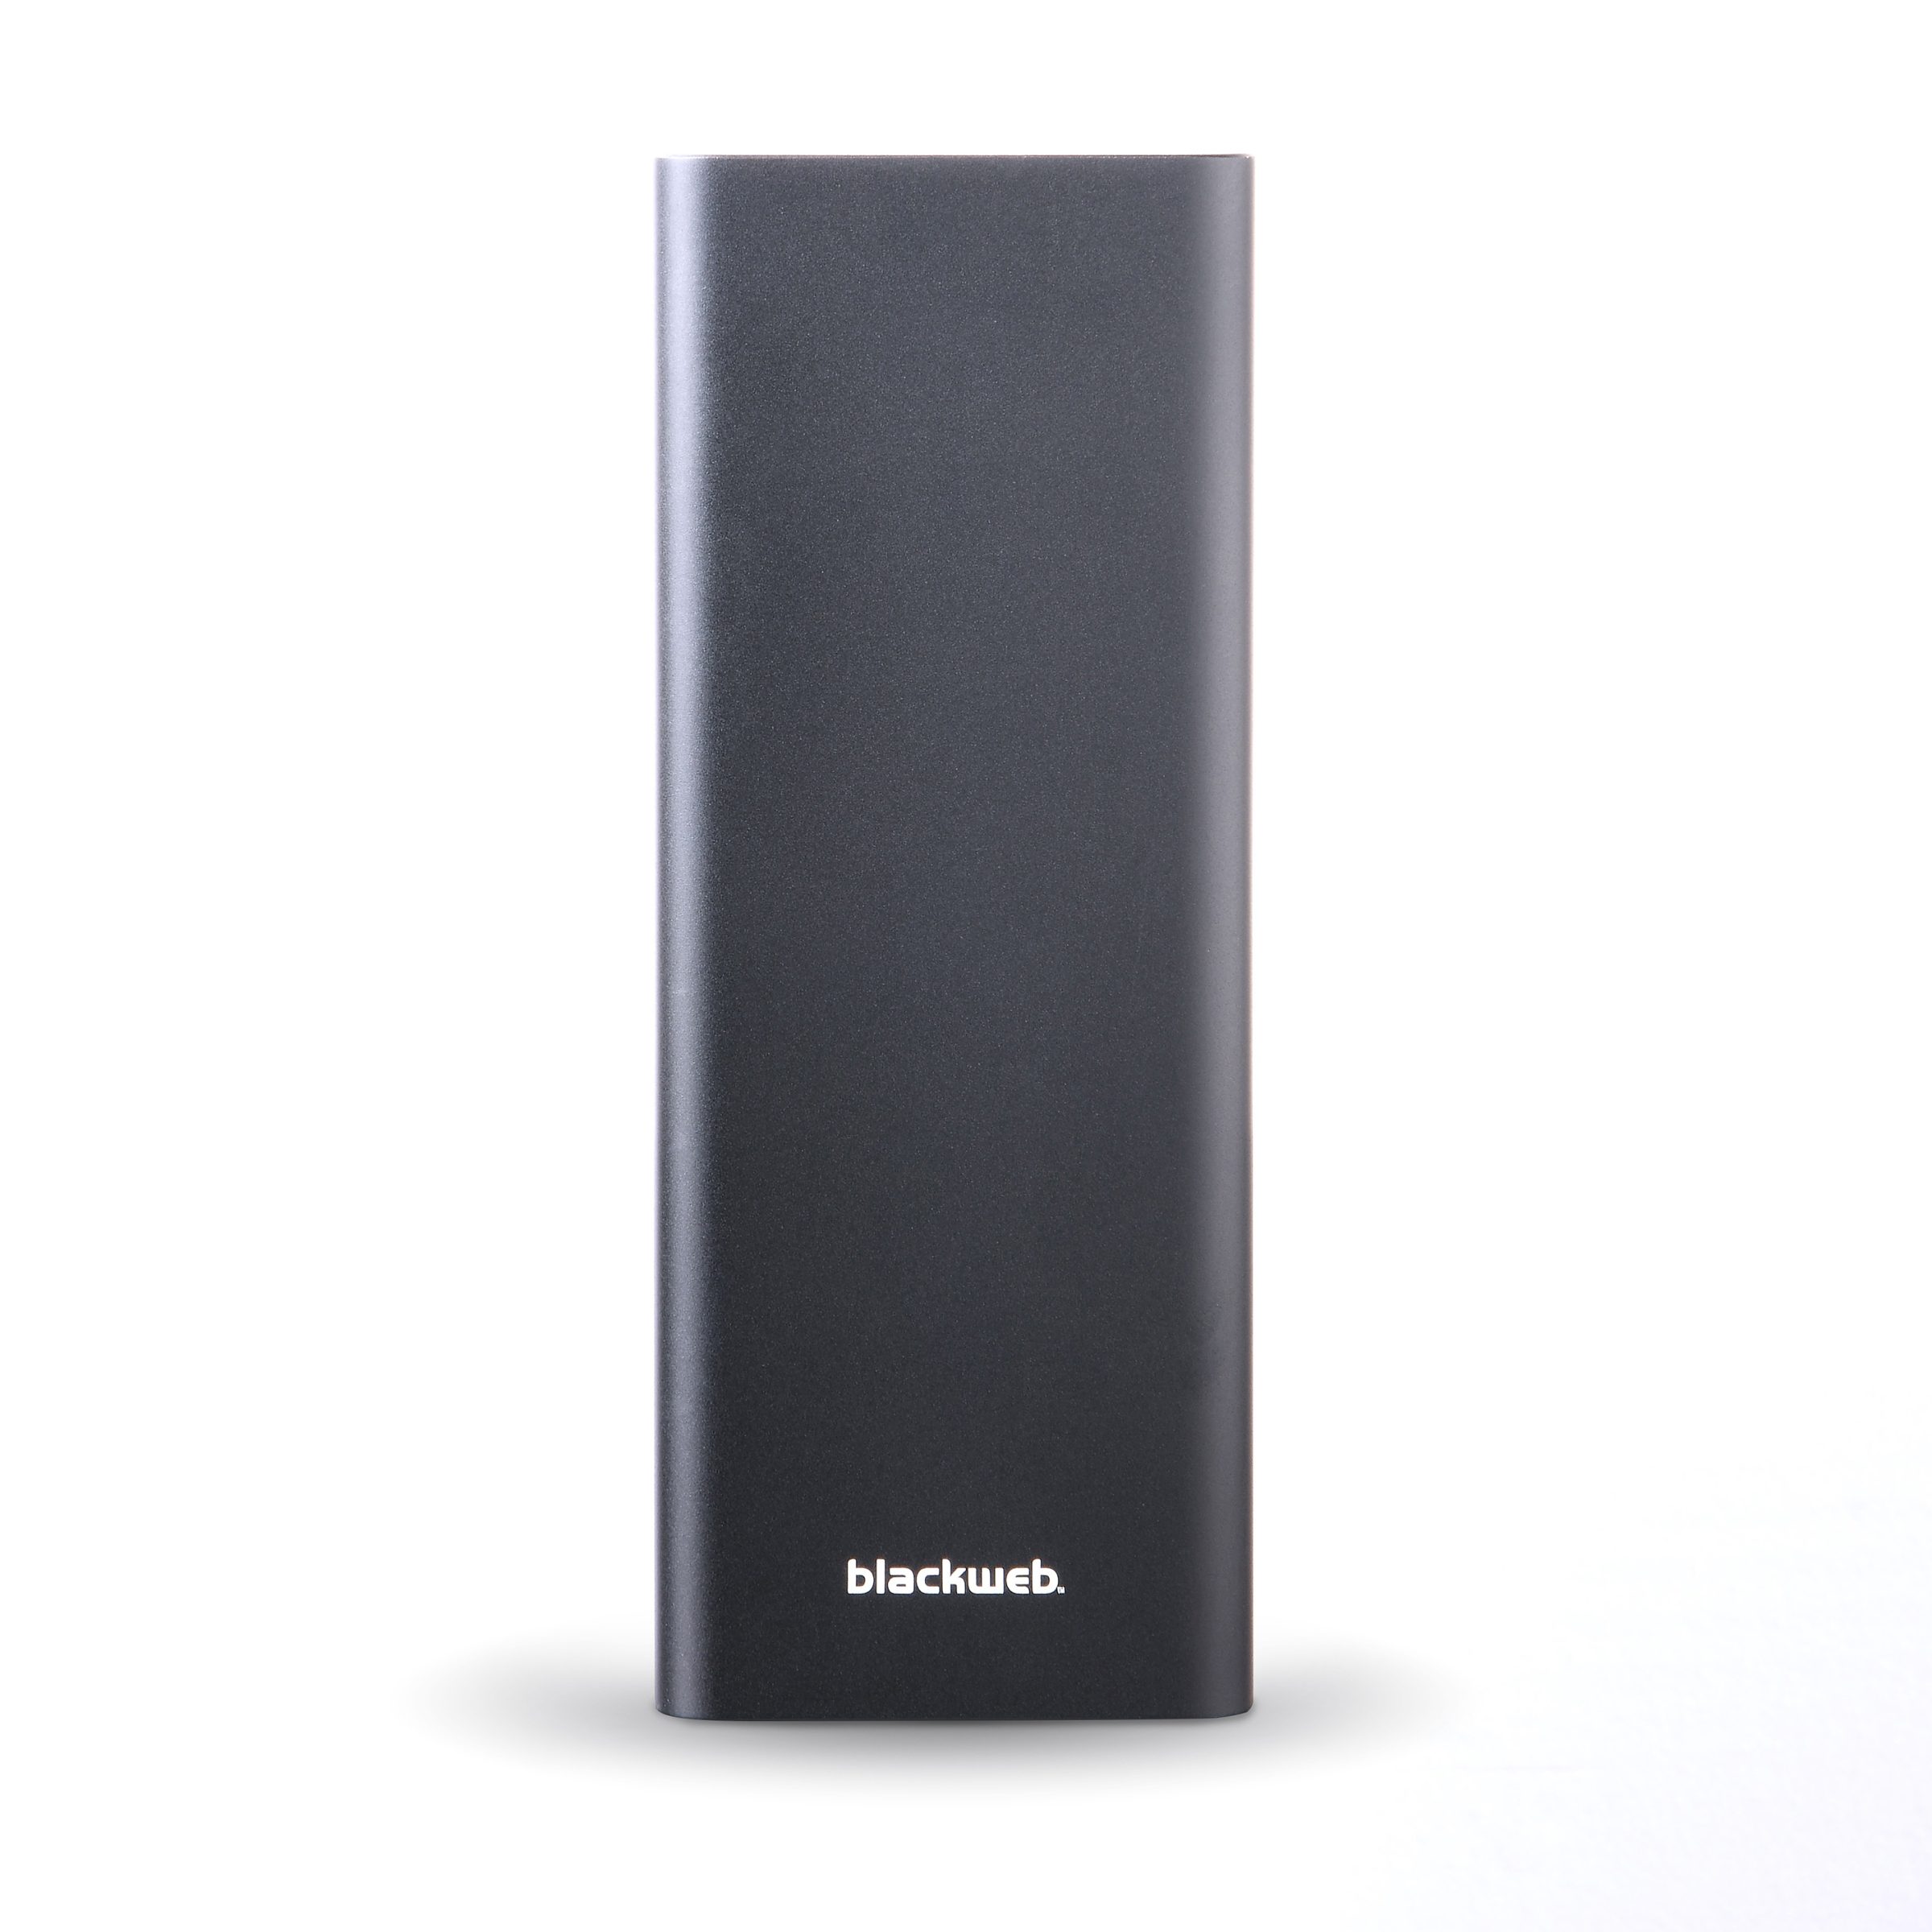 Blackweb 7x Extra Charges 20100 mAh Portable Battery with Power Delivery (Black)